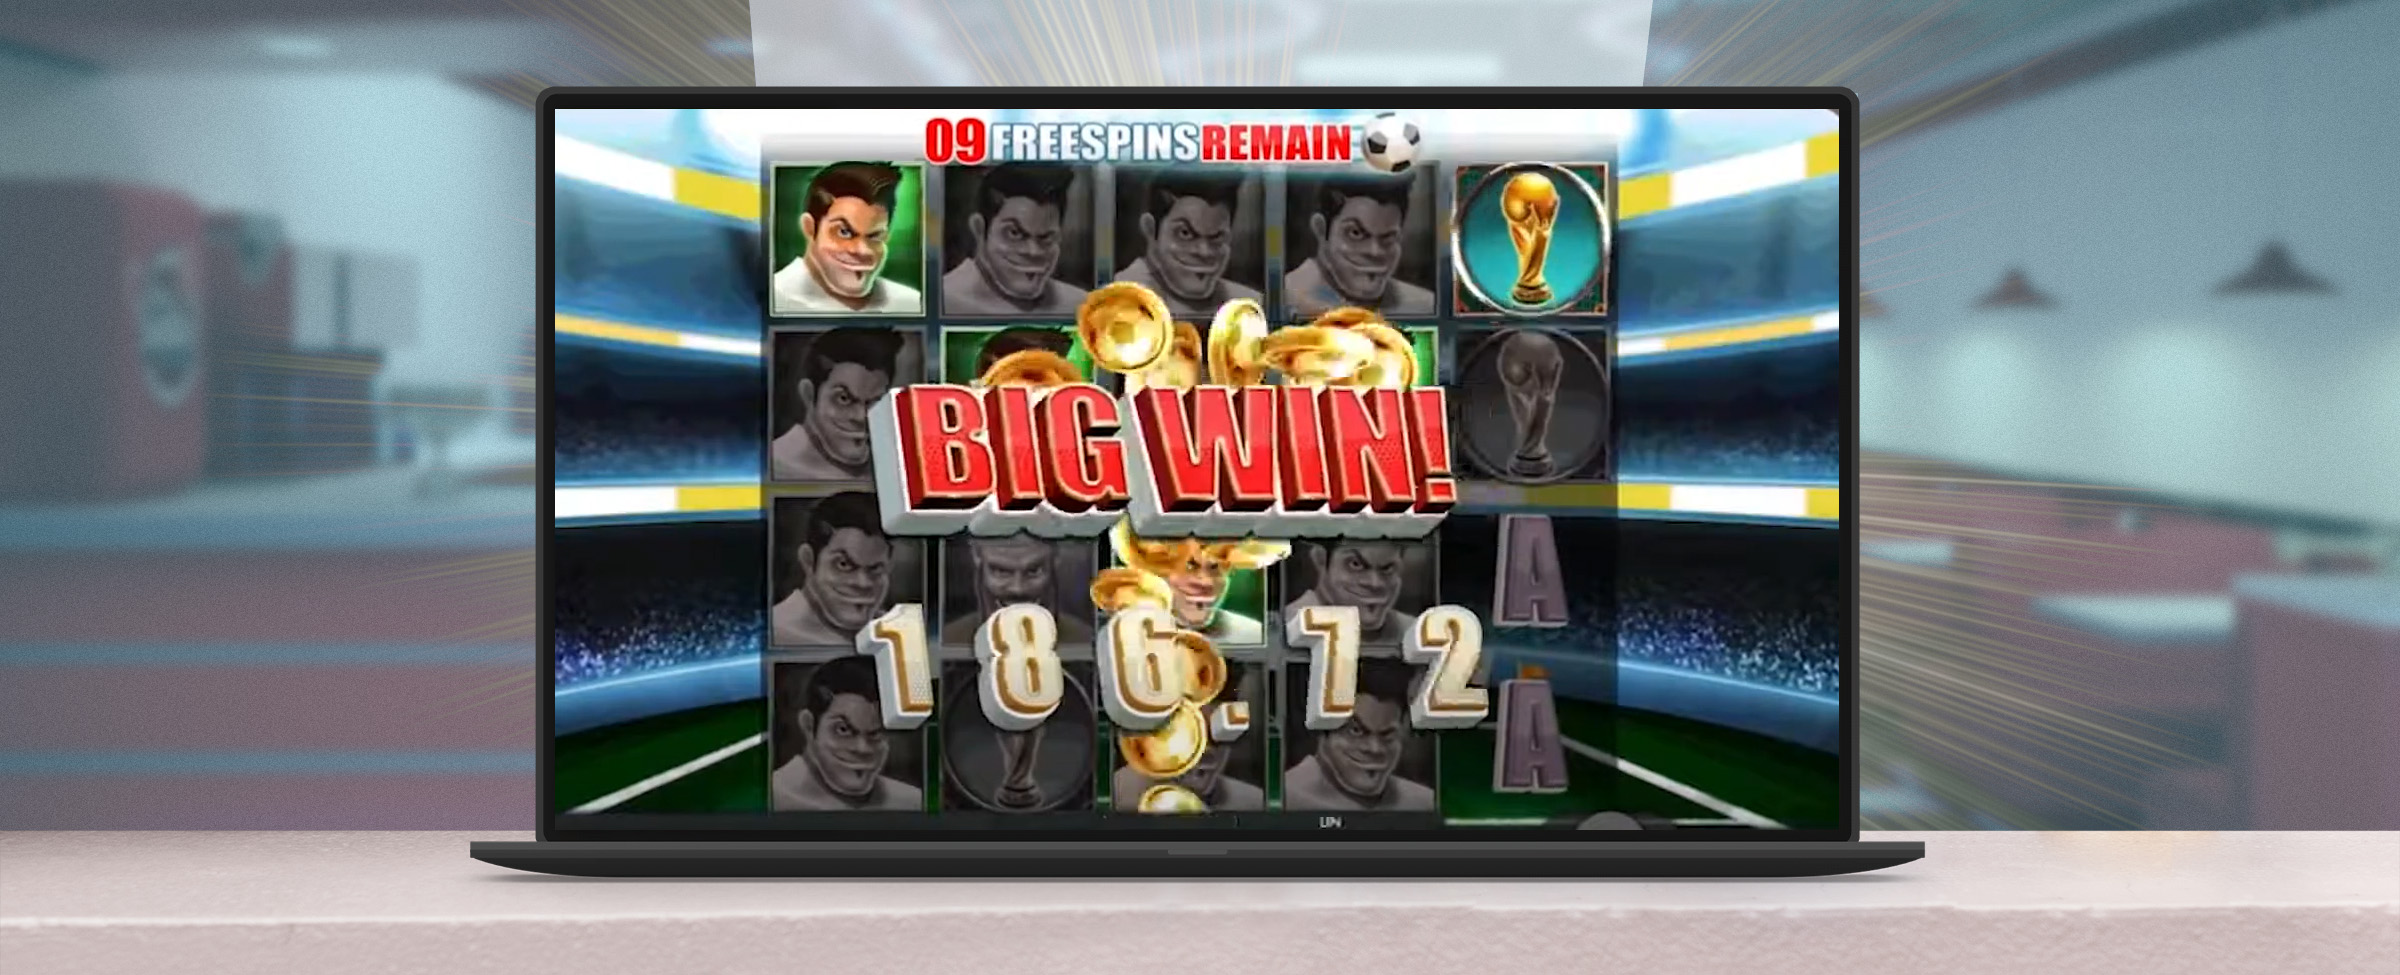 A laptop sits on a counter top of an out-of-focus American diner, previewing a screenshot of the gameplay of the Cafe Casino slot ‘World Cup Football’, with the words “Big Win” accompanied by 186.72, indicating the amount won.